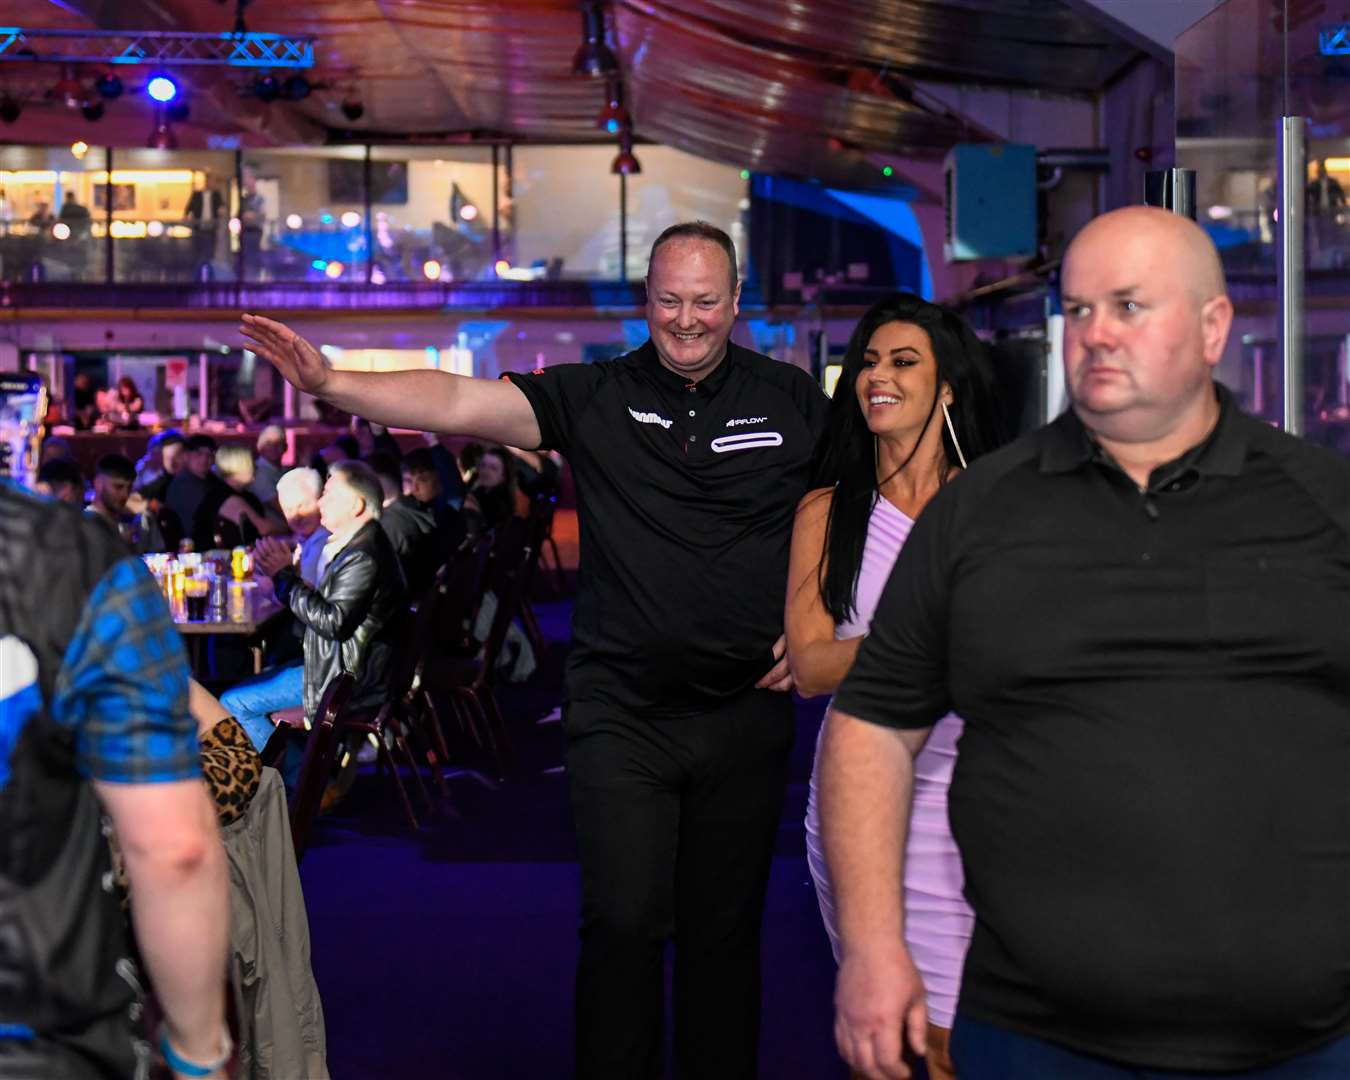 Pro darts players competed against local challengers at a 'Darts Masters' event at Inverness Ice Rink last weekend. Photo: Inverness Athletic FC/SW Photo